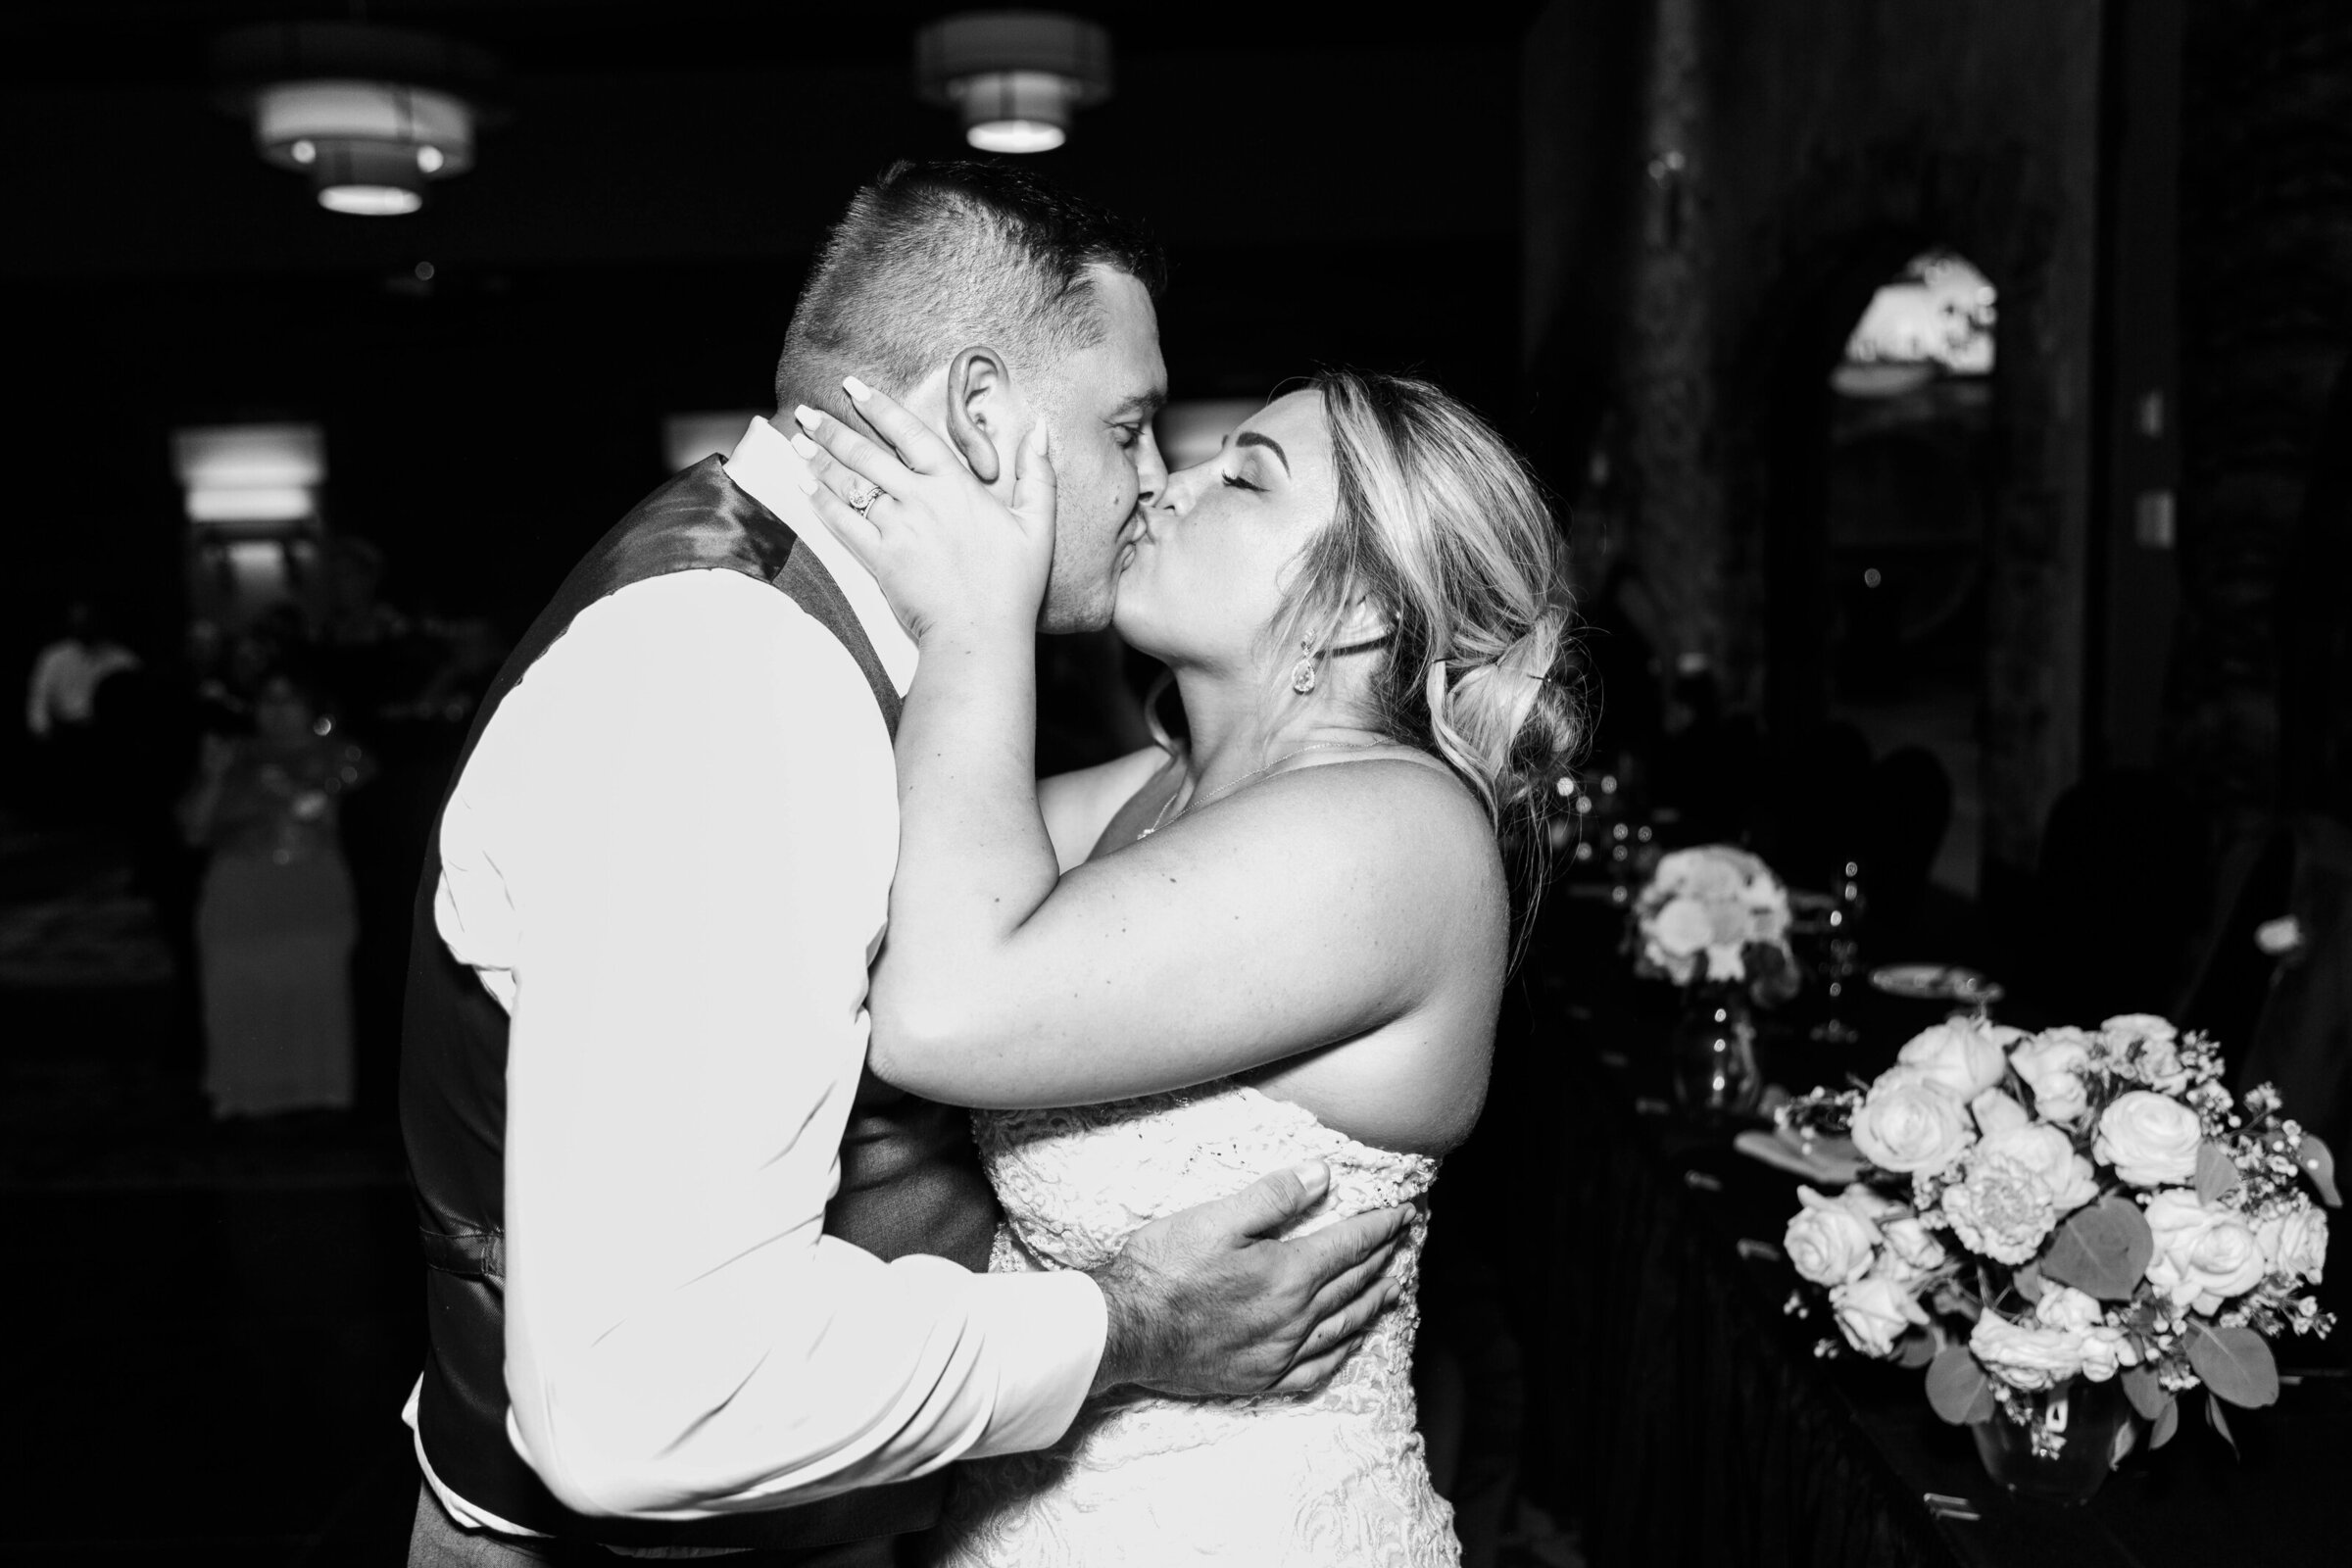 A black and white photo of a bride and groom kissing at their wedding reception.